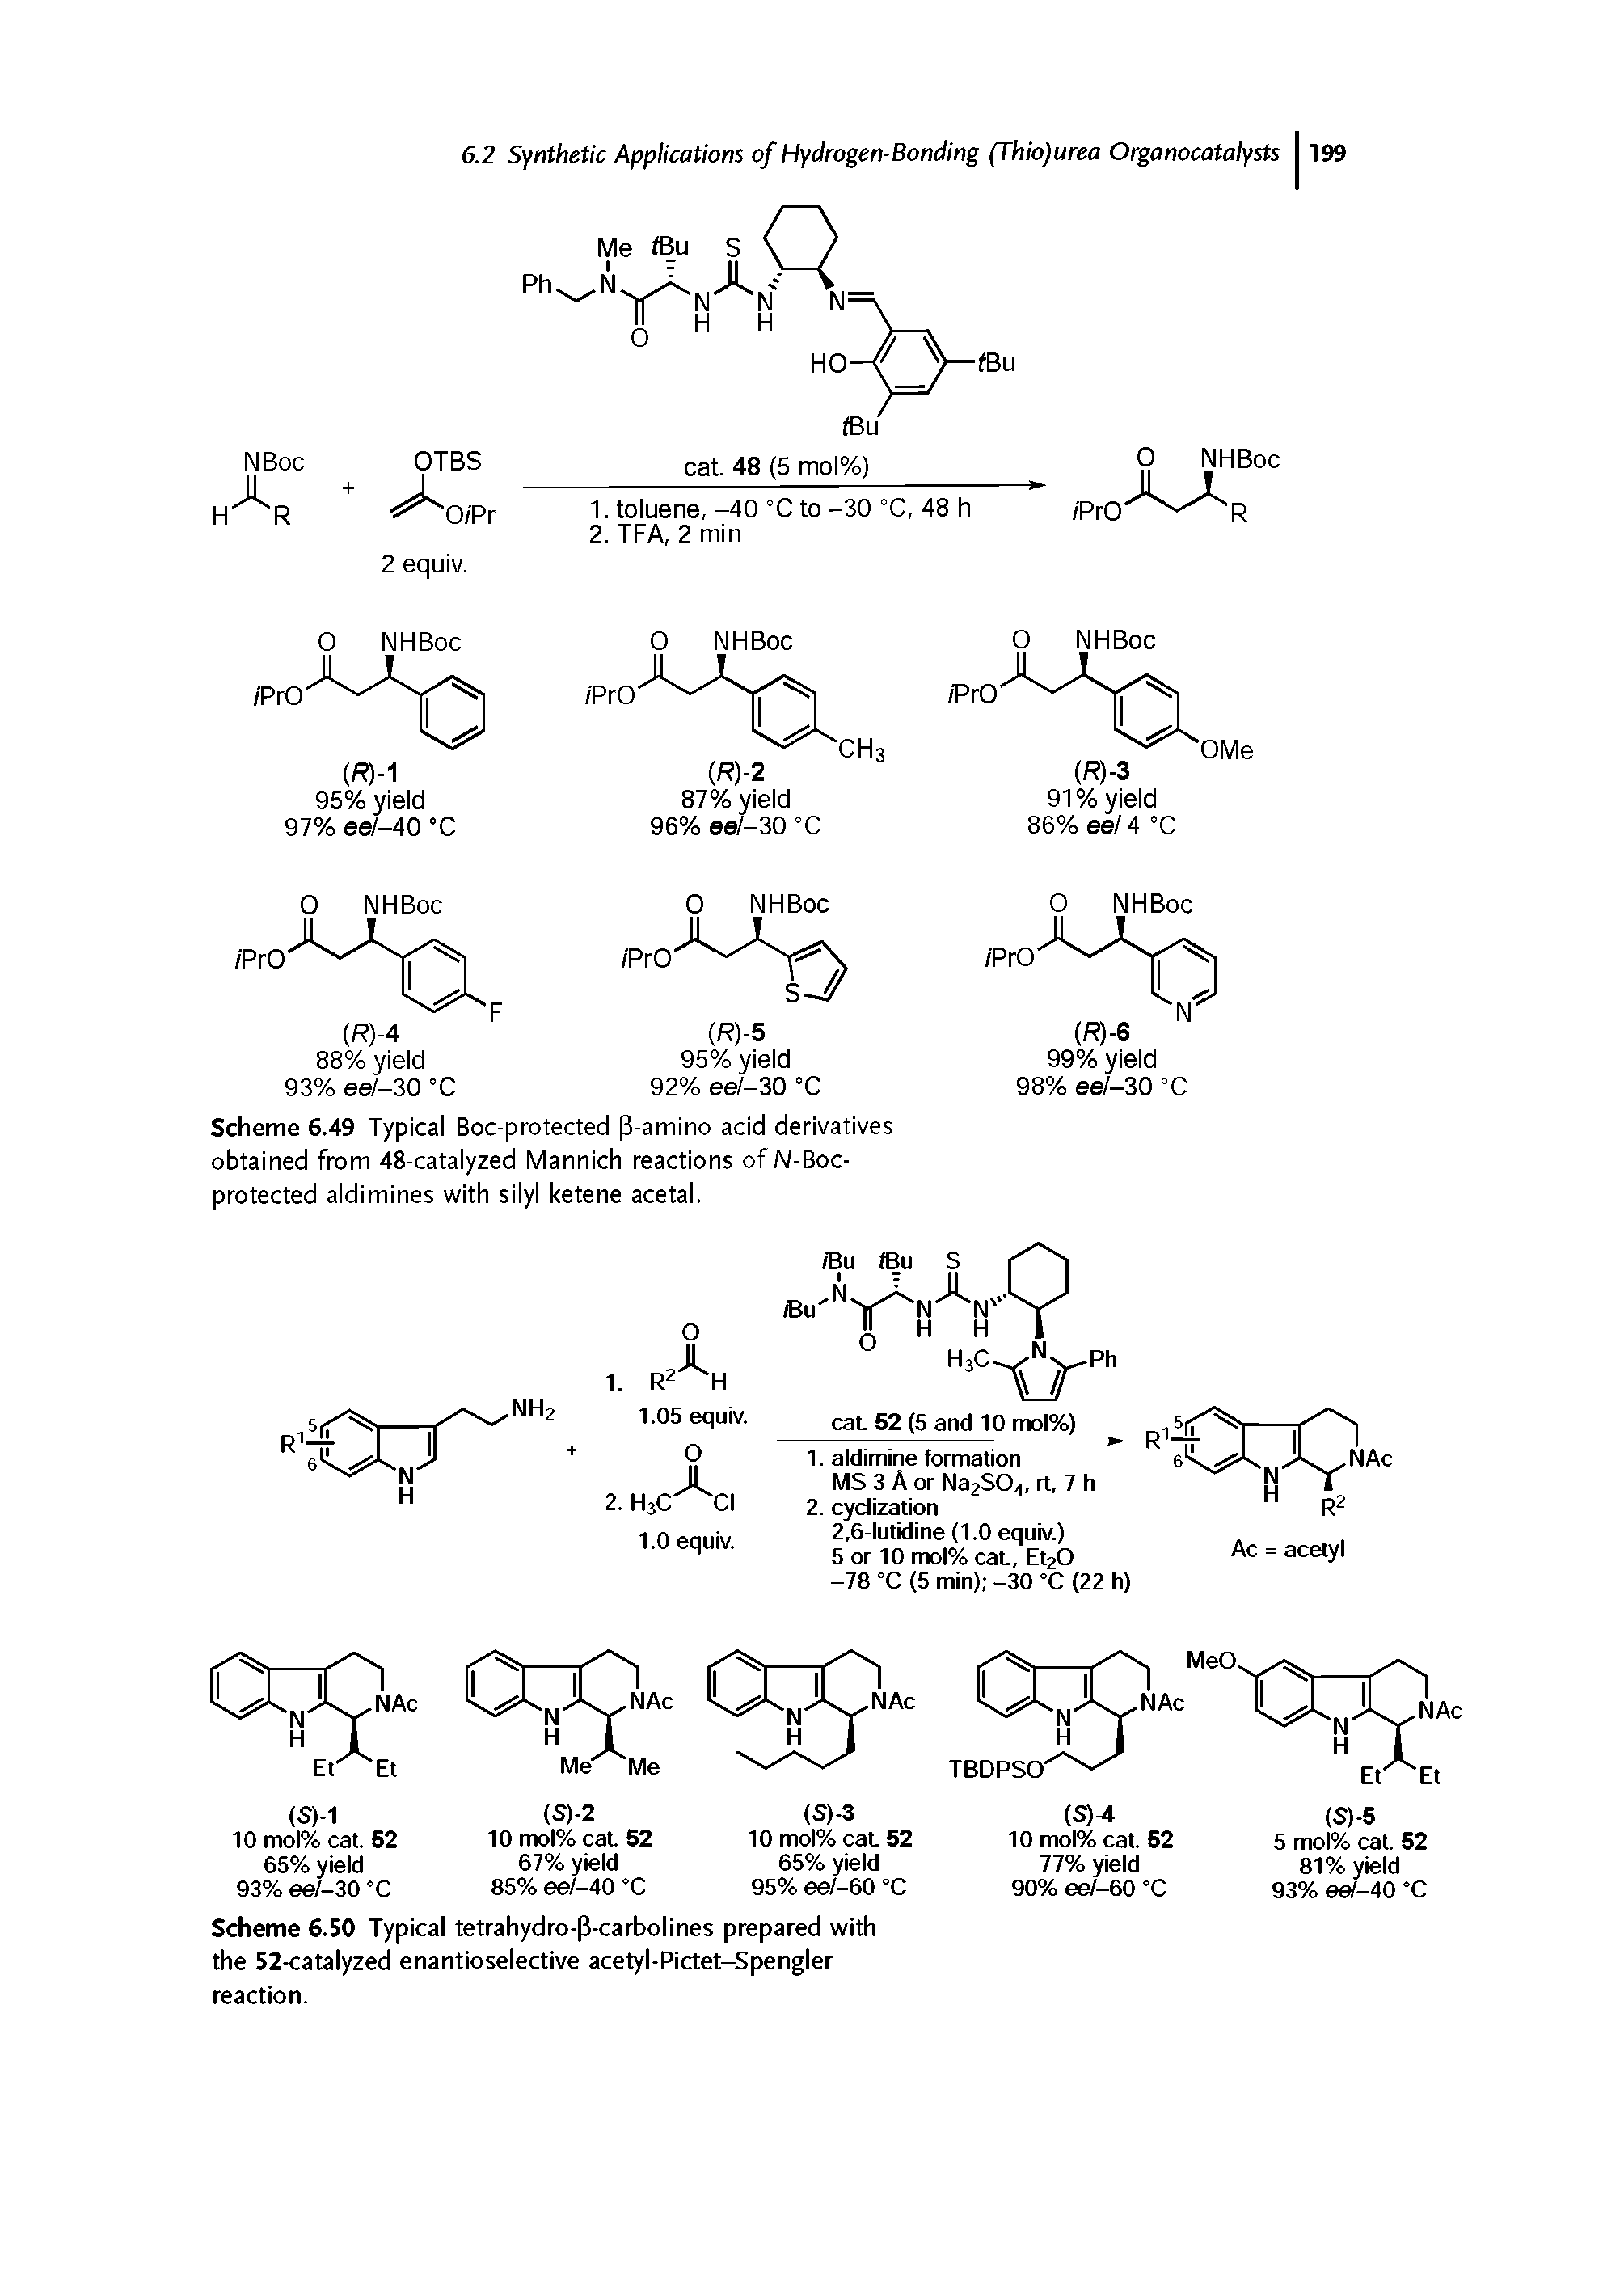 Scheme 6.49 Typical Boc-protected 5-amino acid derivatives obtained from 48-catalyzed Mannich reactions of N-Boc-protected aldimines with silyl ketene acetal.